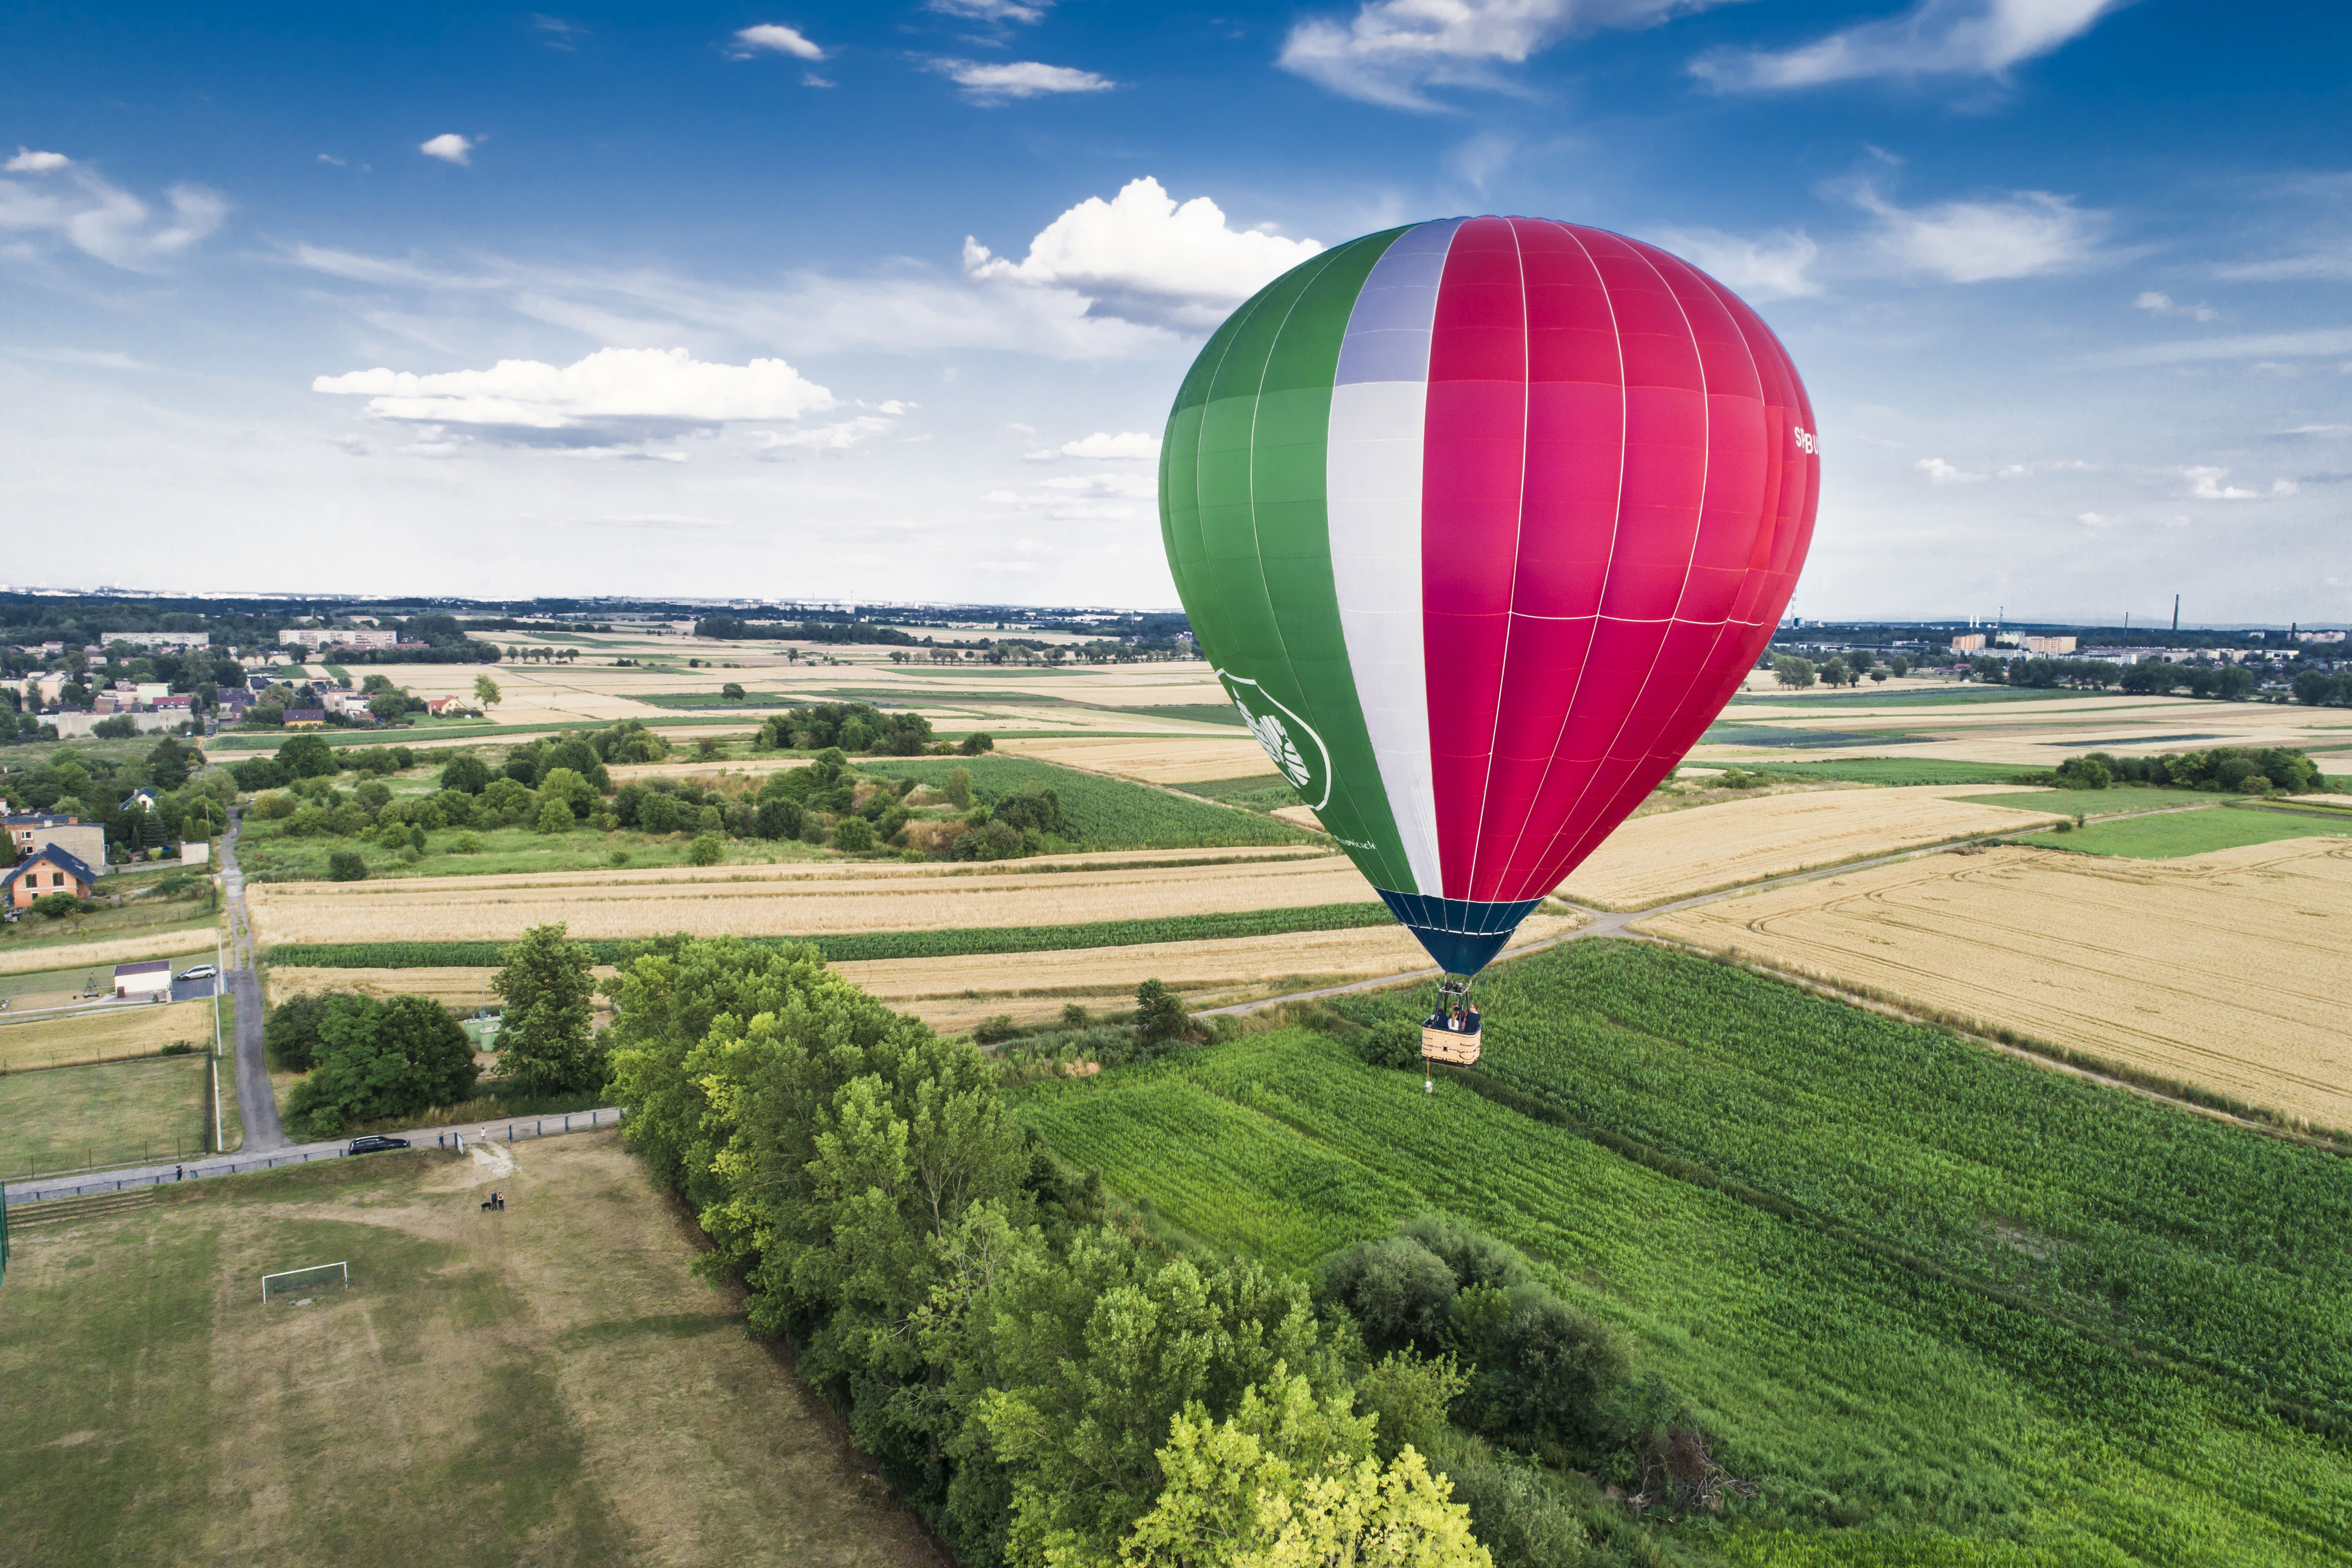 Green, pink and white striped hot air balloon flying above the fields.